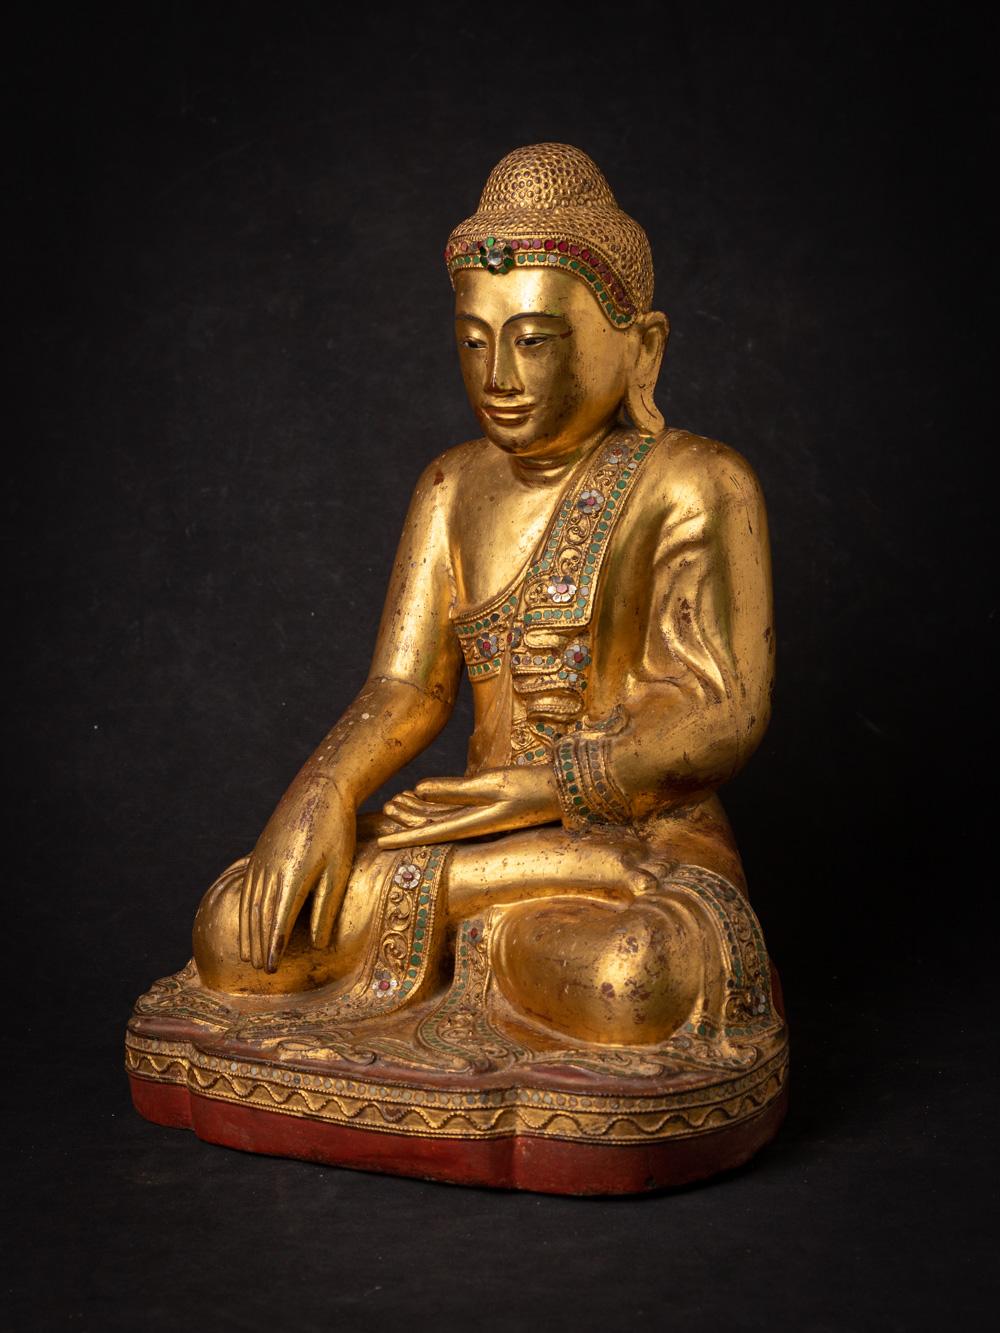 The antique wooden Burmese Mandalay Buddha is a truly exquisite and spiritually significant artifact originating from Burma. Crafted from wood and adorned with 24-karat gold gilding, this Buddha statue stands at 38.4 cm in height and measures 28.2